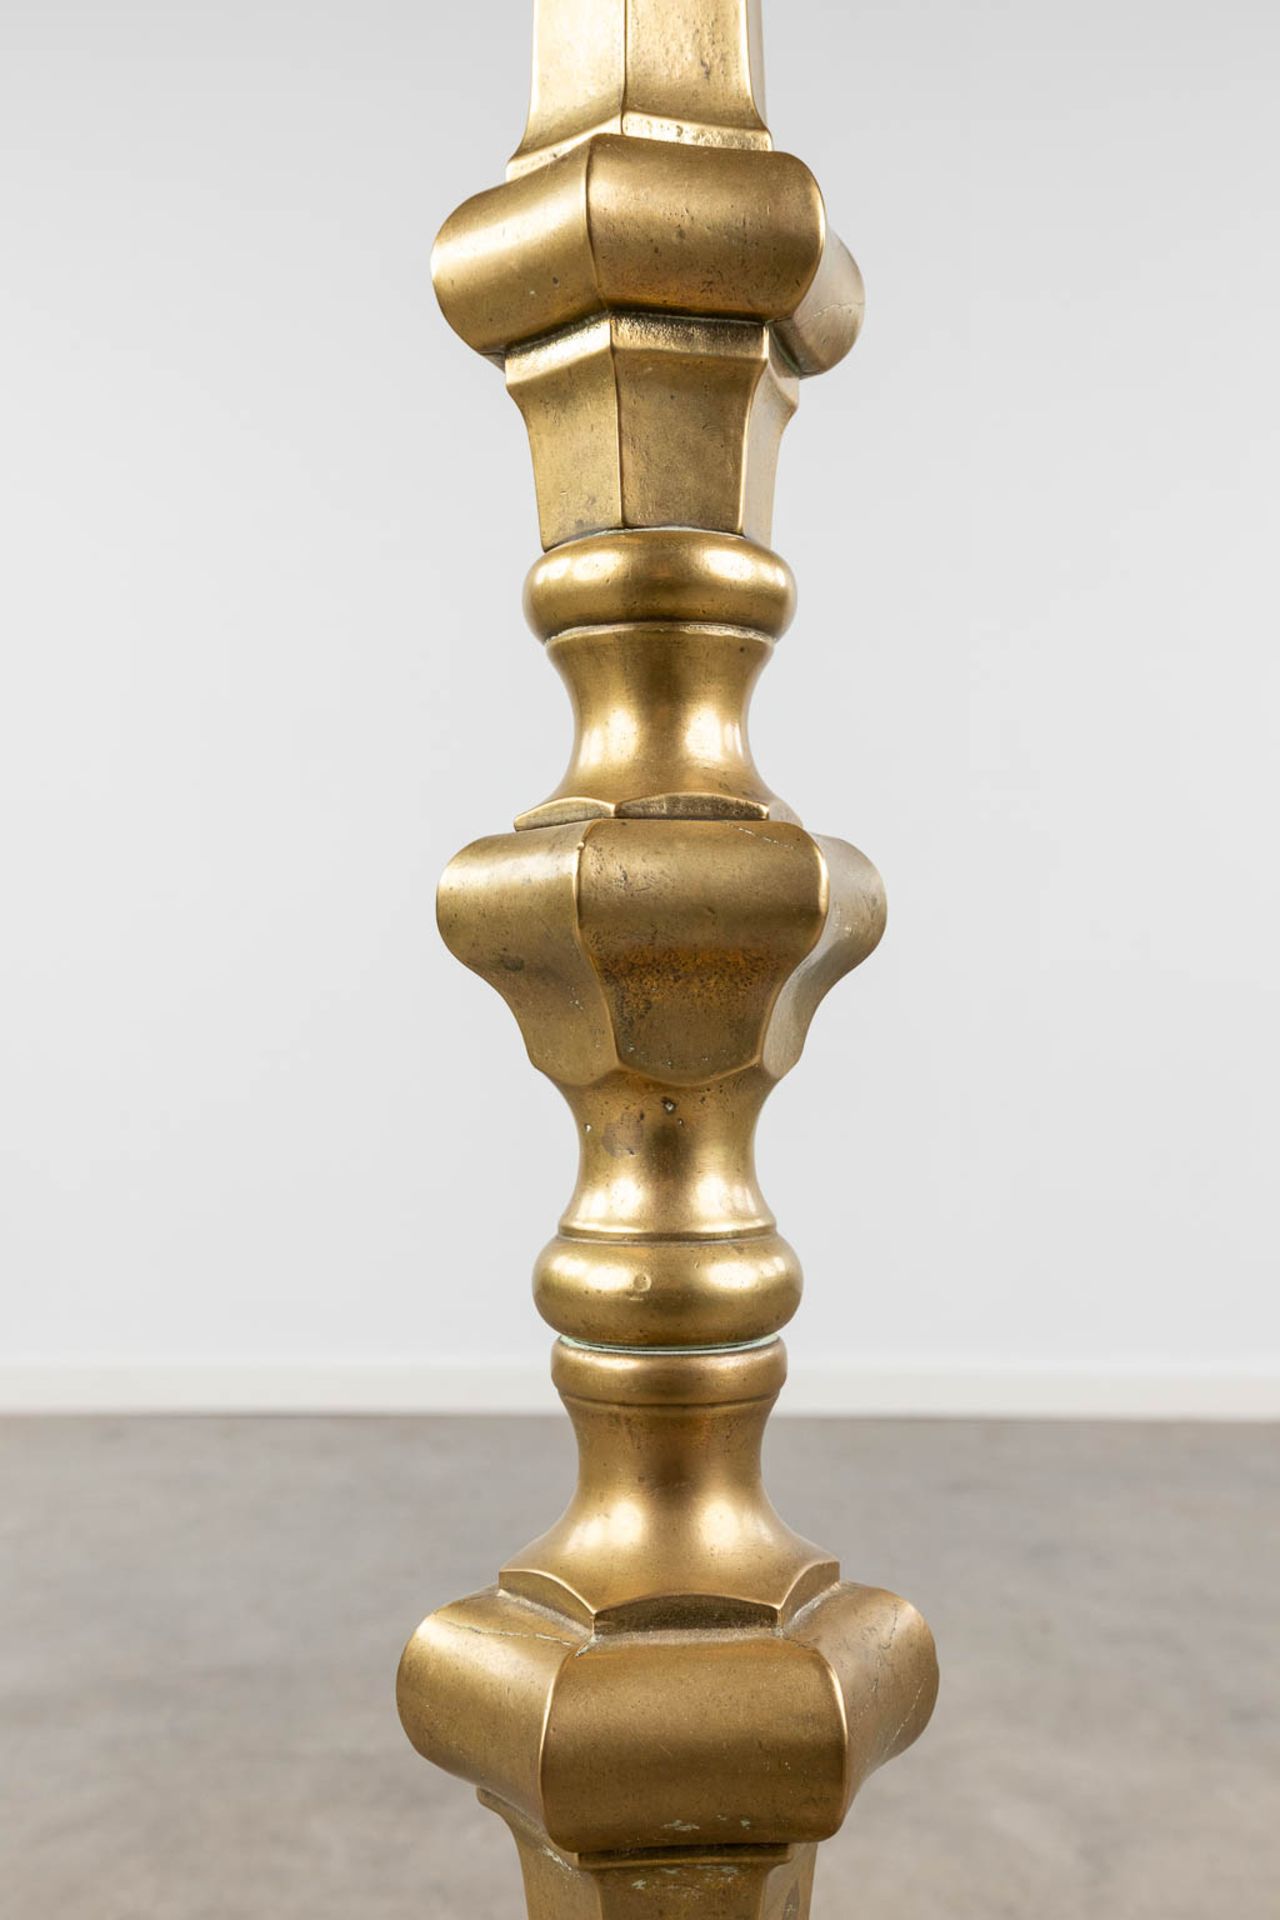 A large Church candlestick/candle holder, bronze. 20th C. (H:120 x D:21 cm) - Image 8 of 10